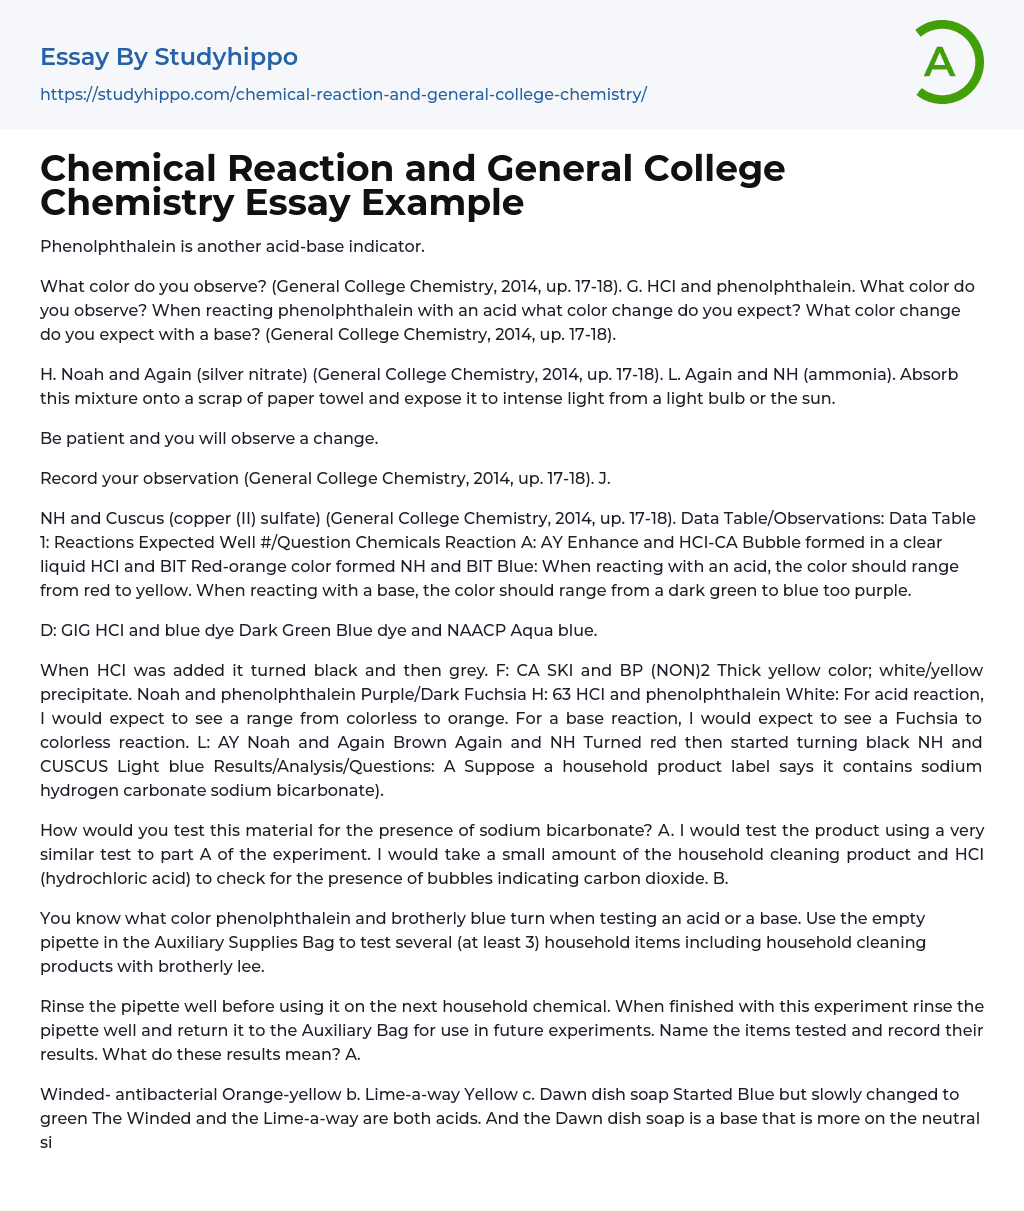 Chemical Reaction and General College Chemistry Essay Example